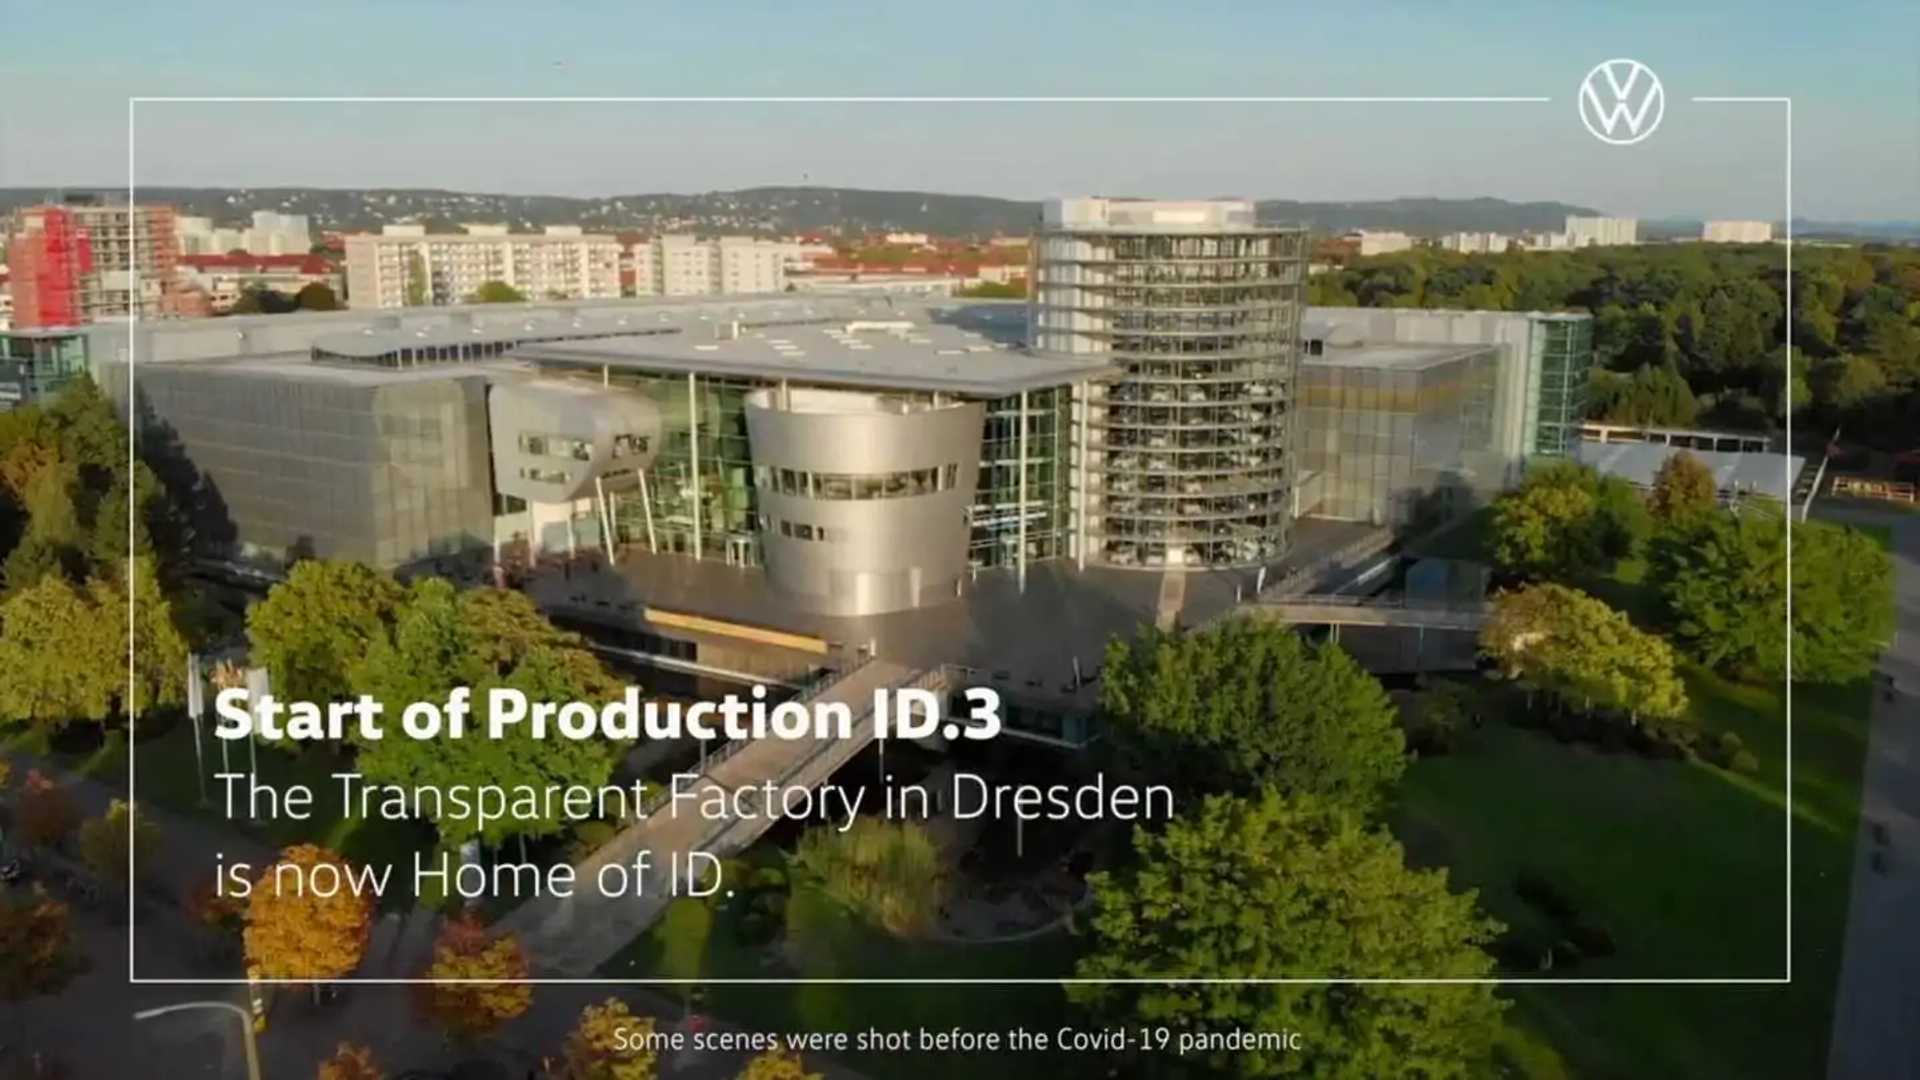 vw said to end id.3 production at dresden's transparent factory